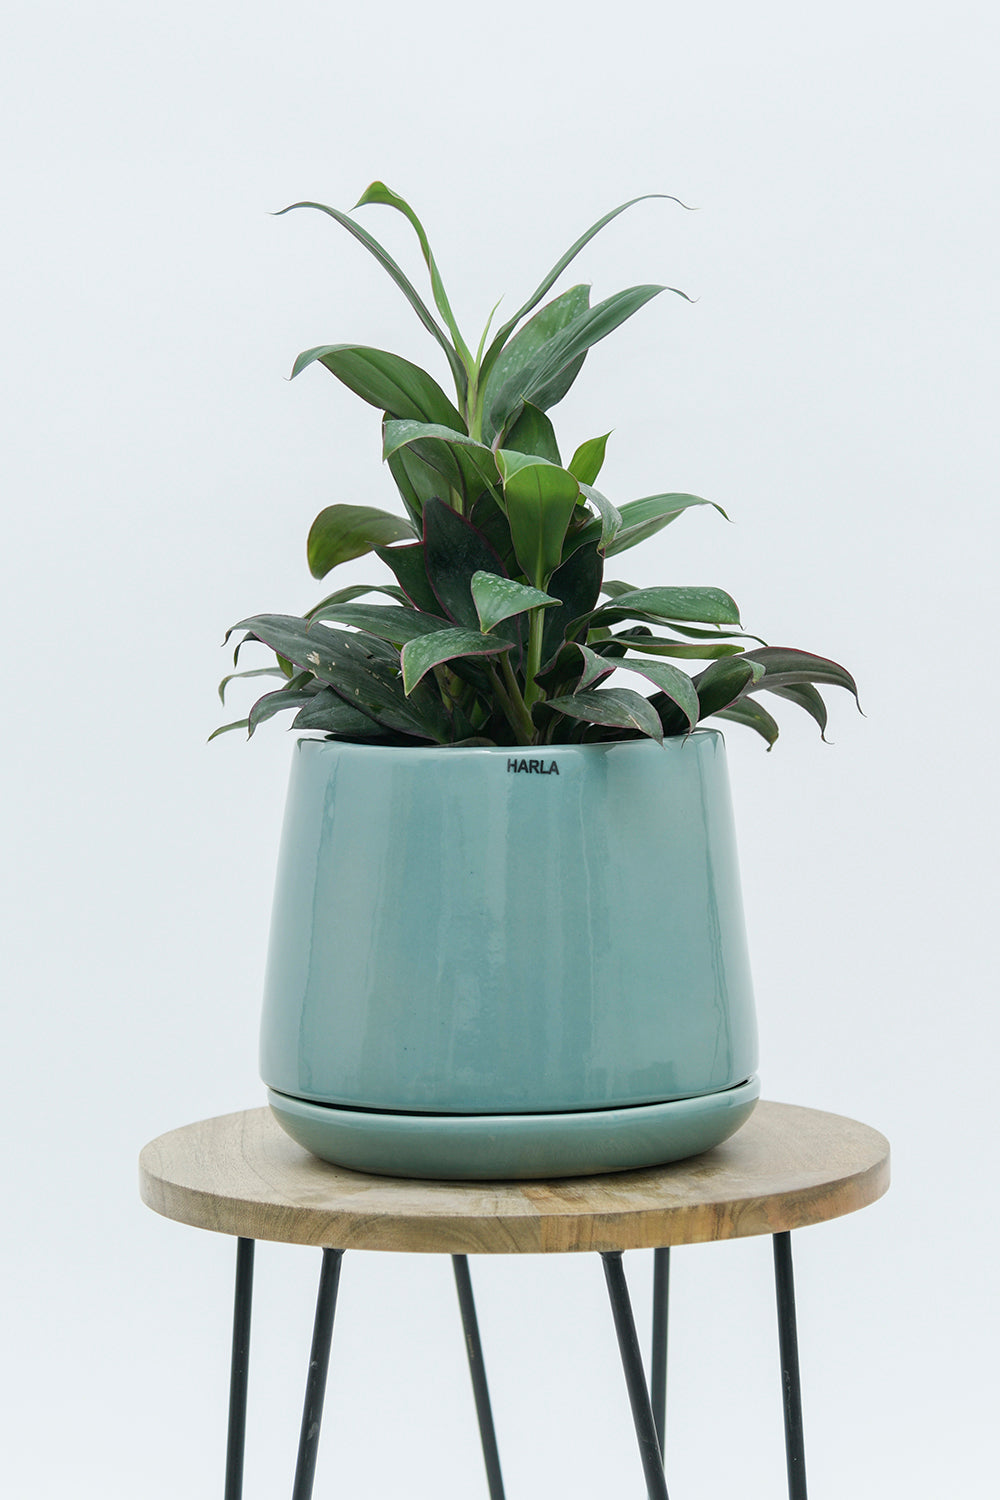 Medium size Monsoon Medley ceramic planter in Aqua Green color with plant placed on the stool.